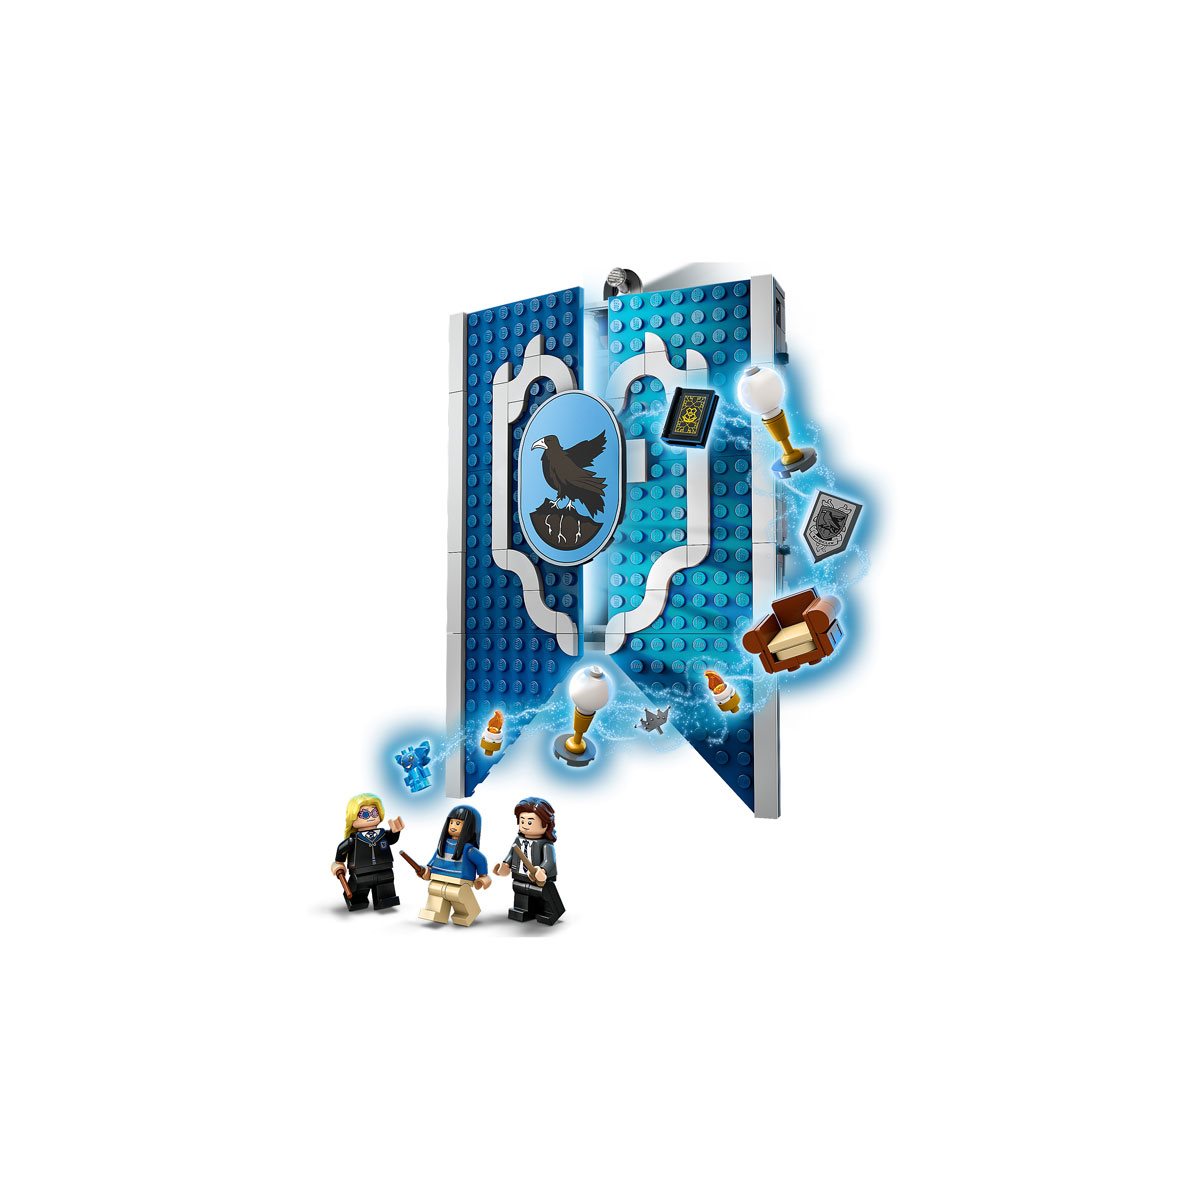 Lego Harry Potter Ravenclaw House Banner 2in1 Toy 76411 : Target